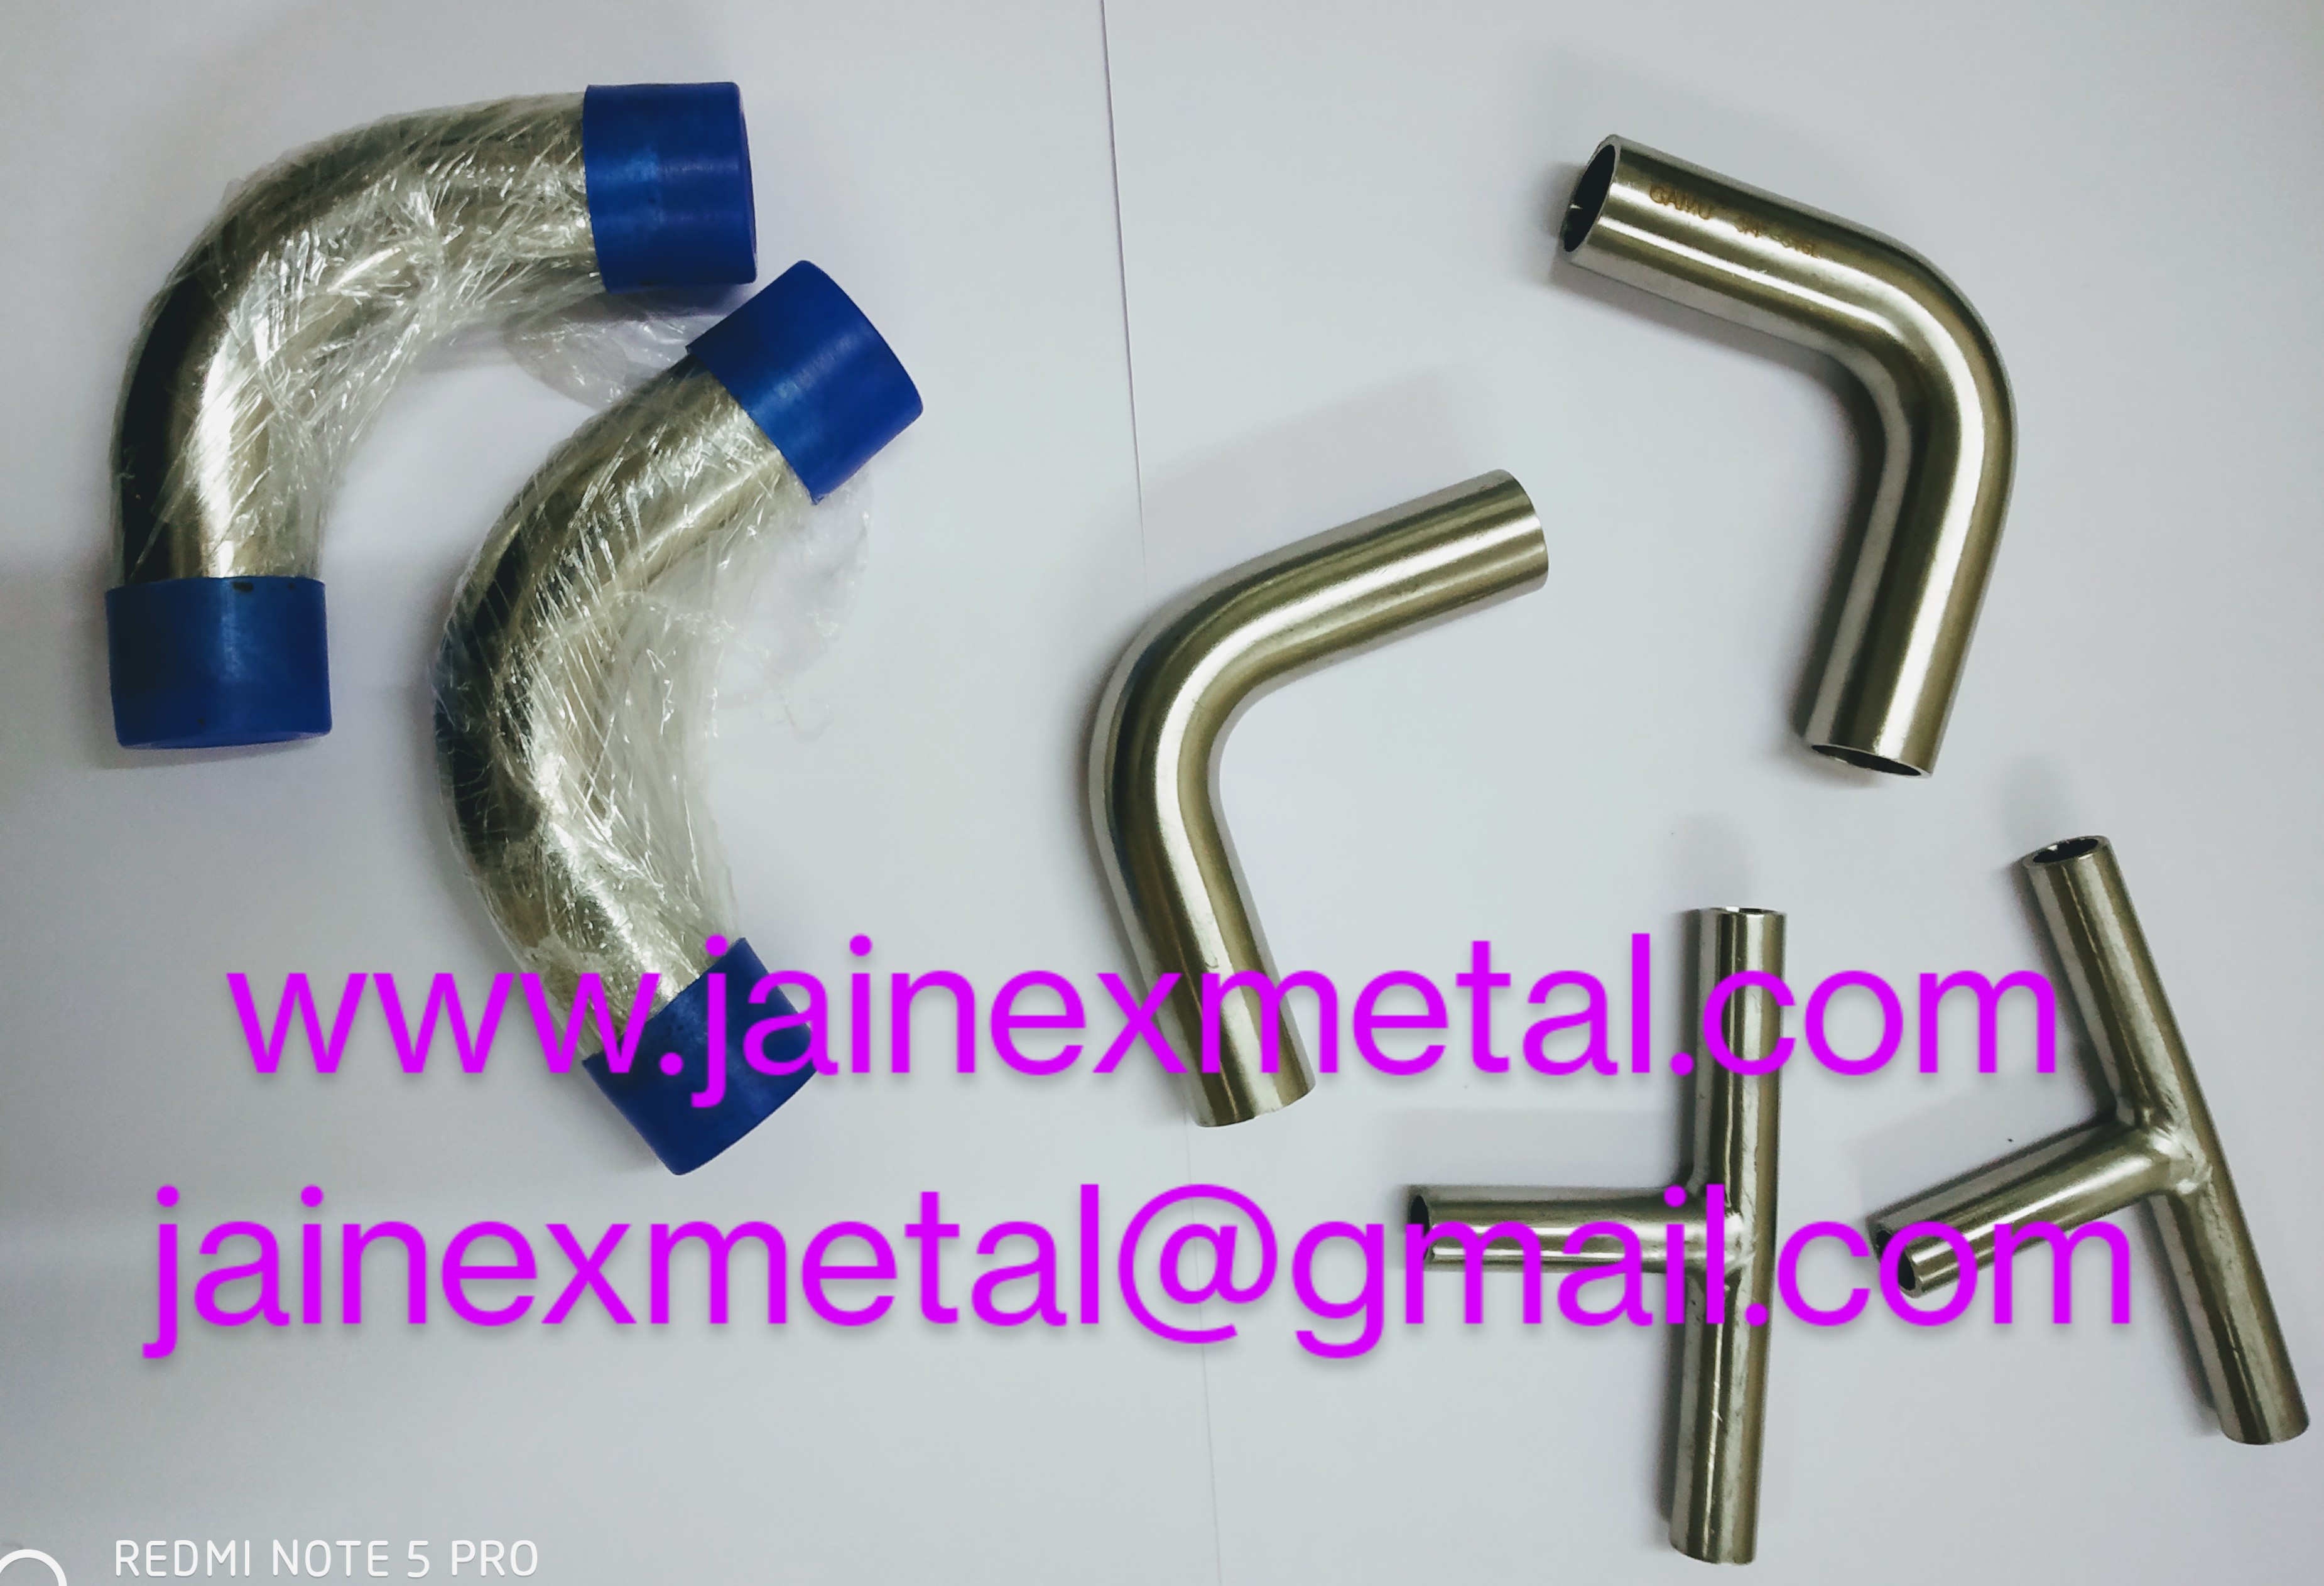 STAINLESS STEEL ELBOW
STAINLESS STEEL BEND

#stainlesssteelelbow #elbow #bend #sselbow #90degelbo